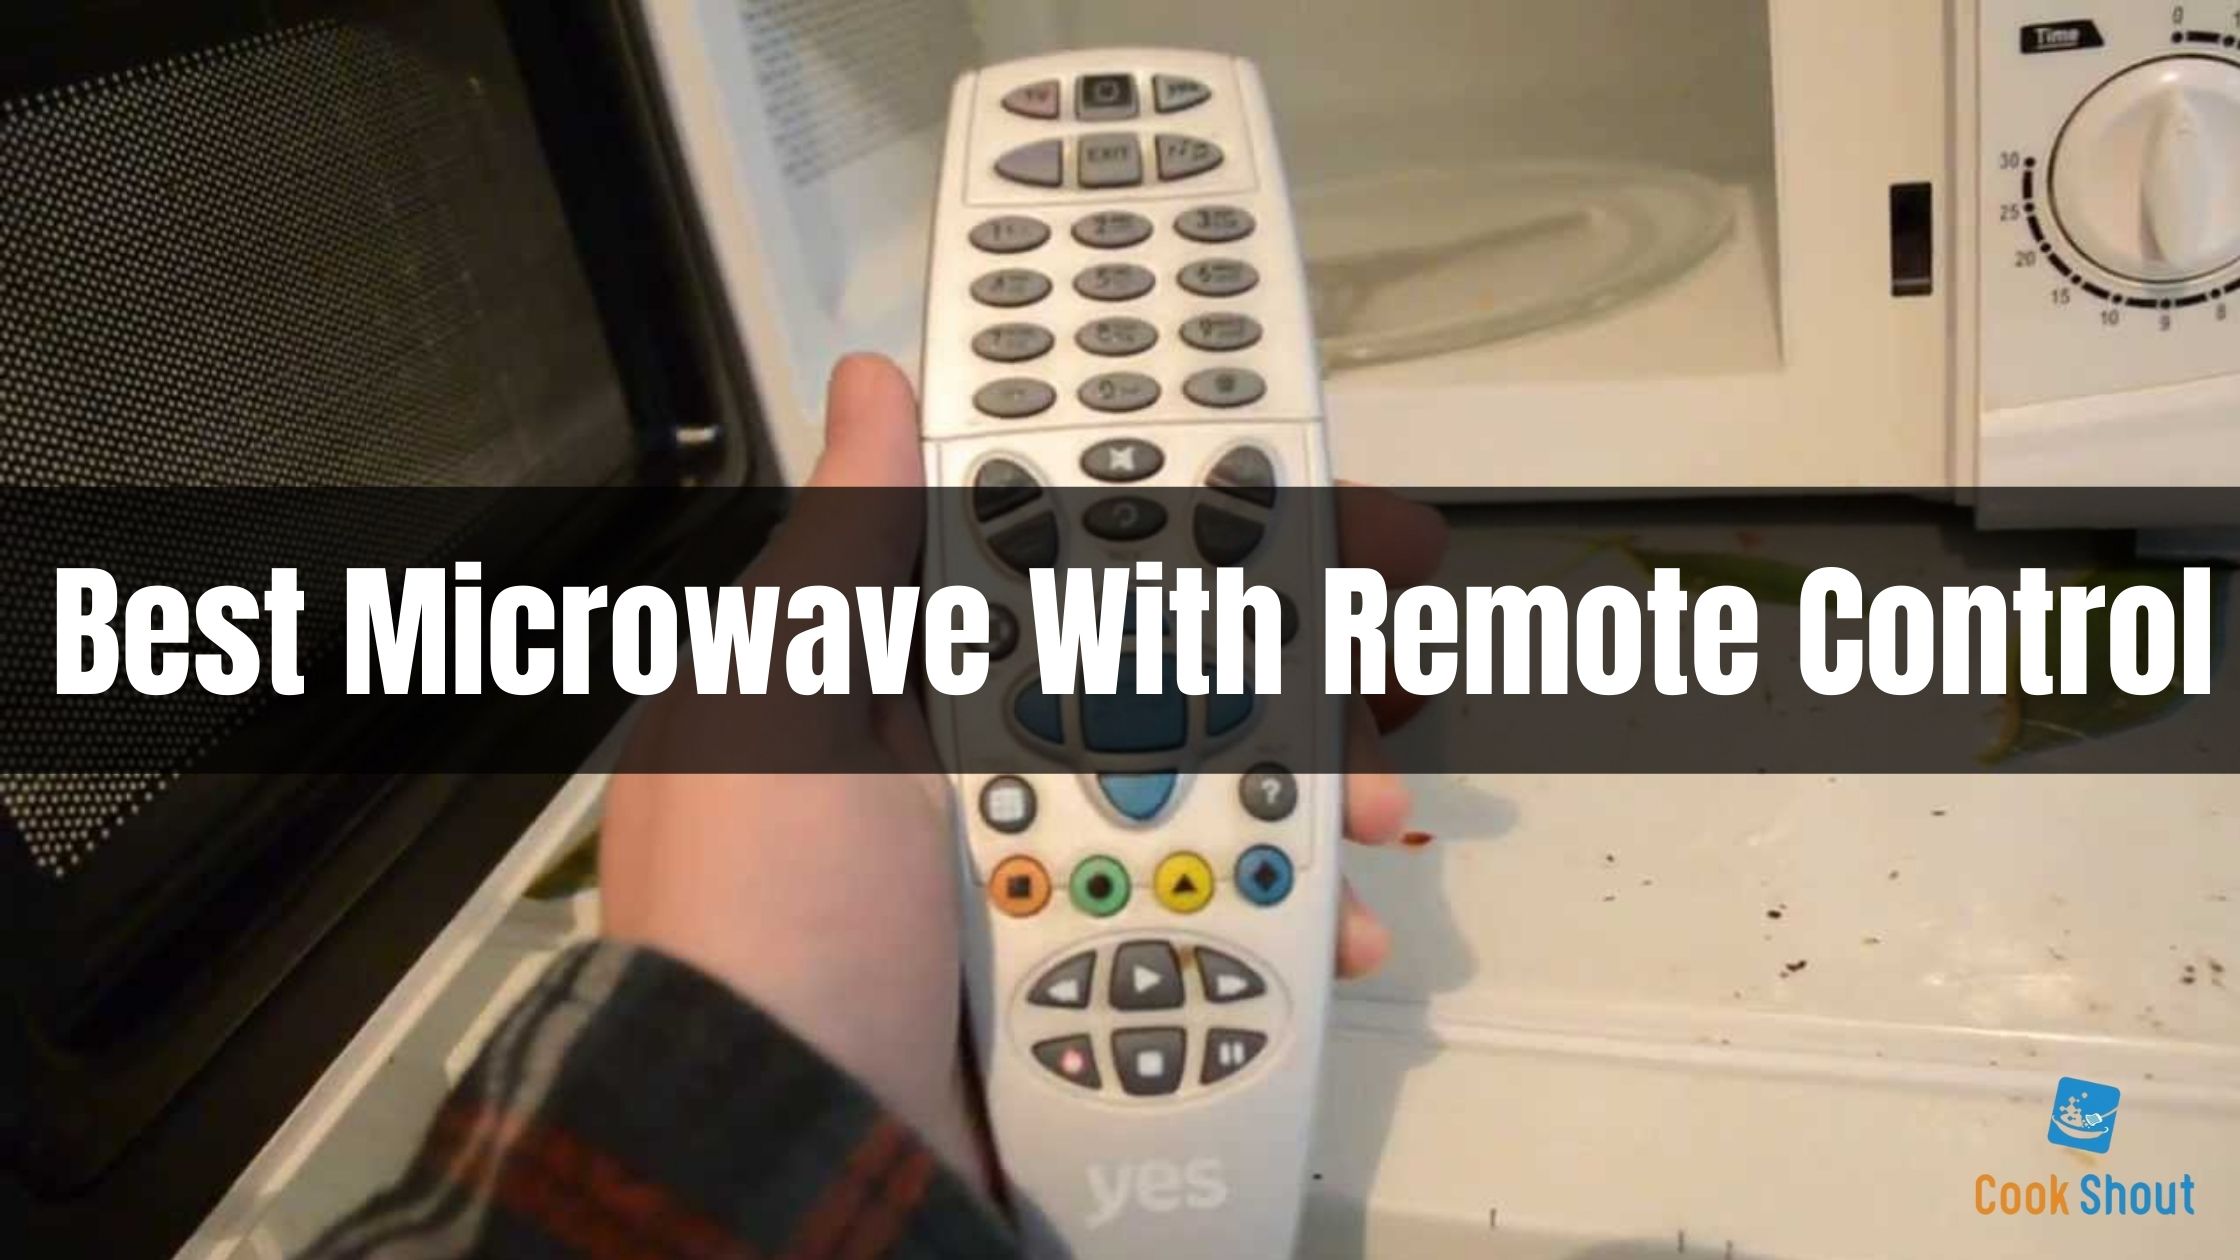 Best Microwave With Remote Control